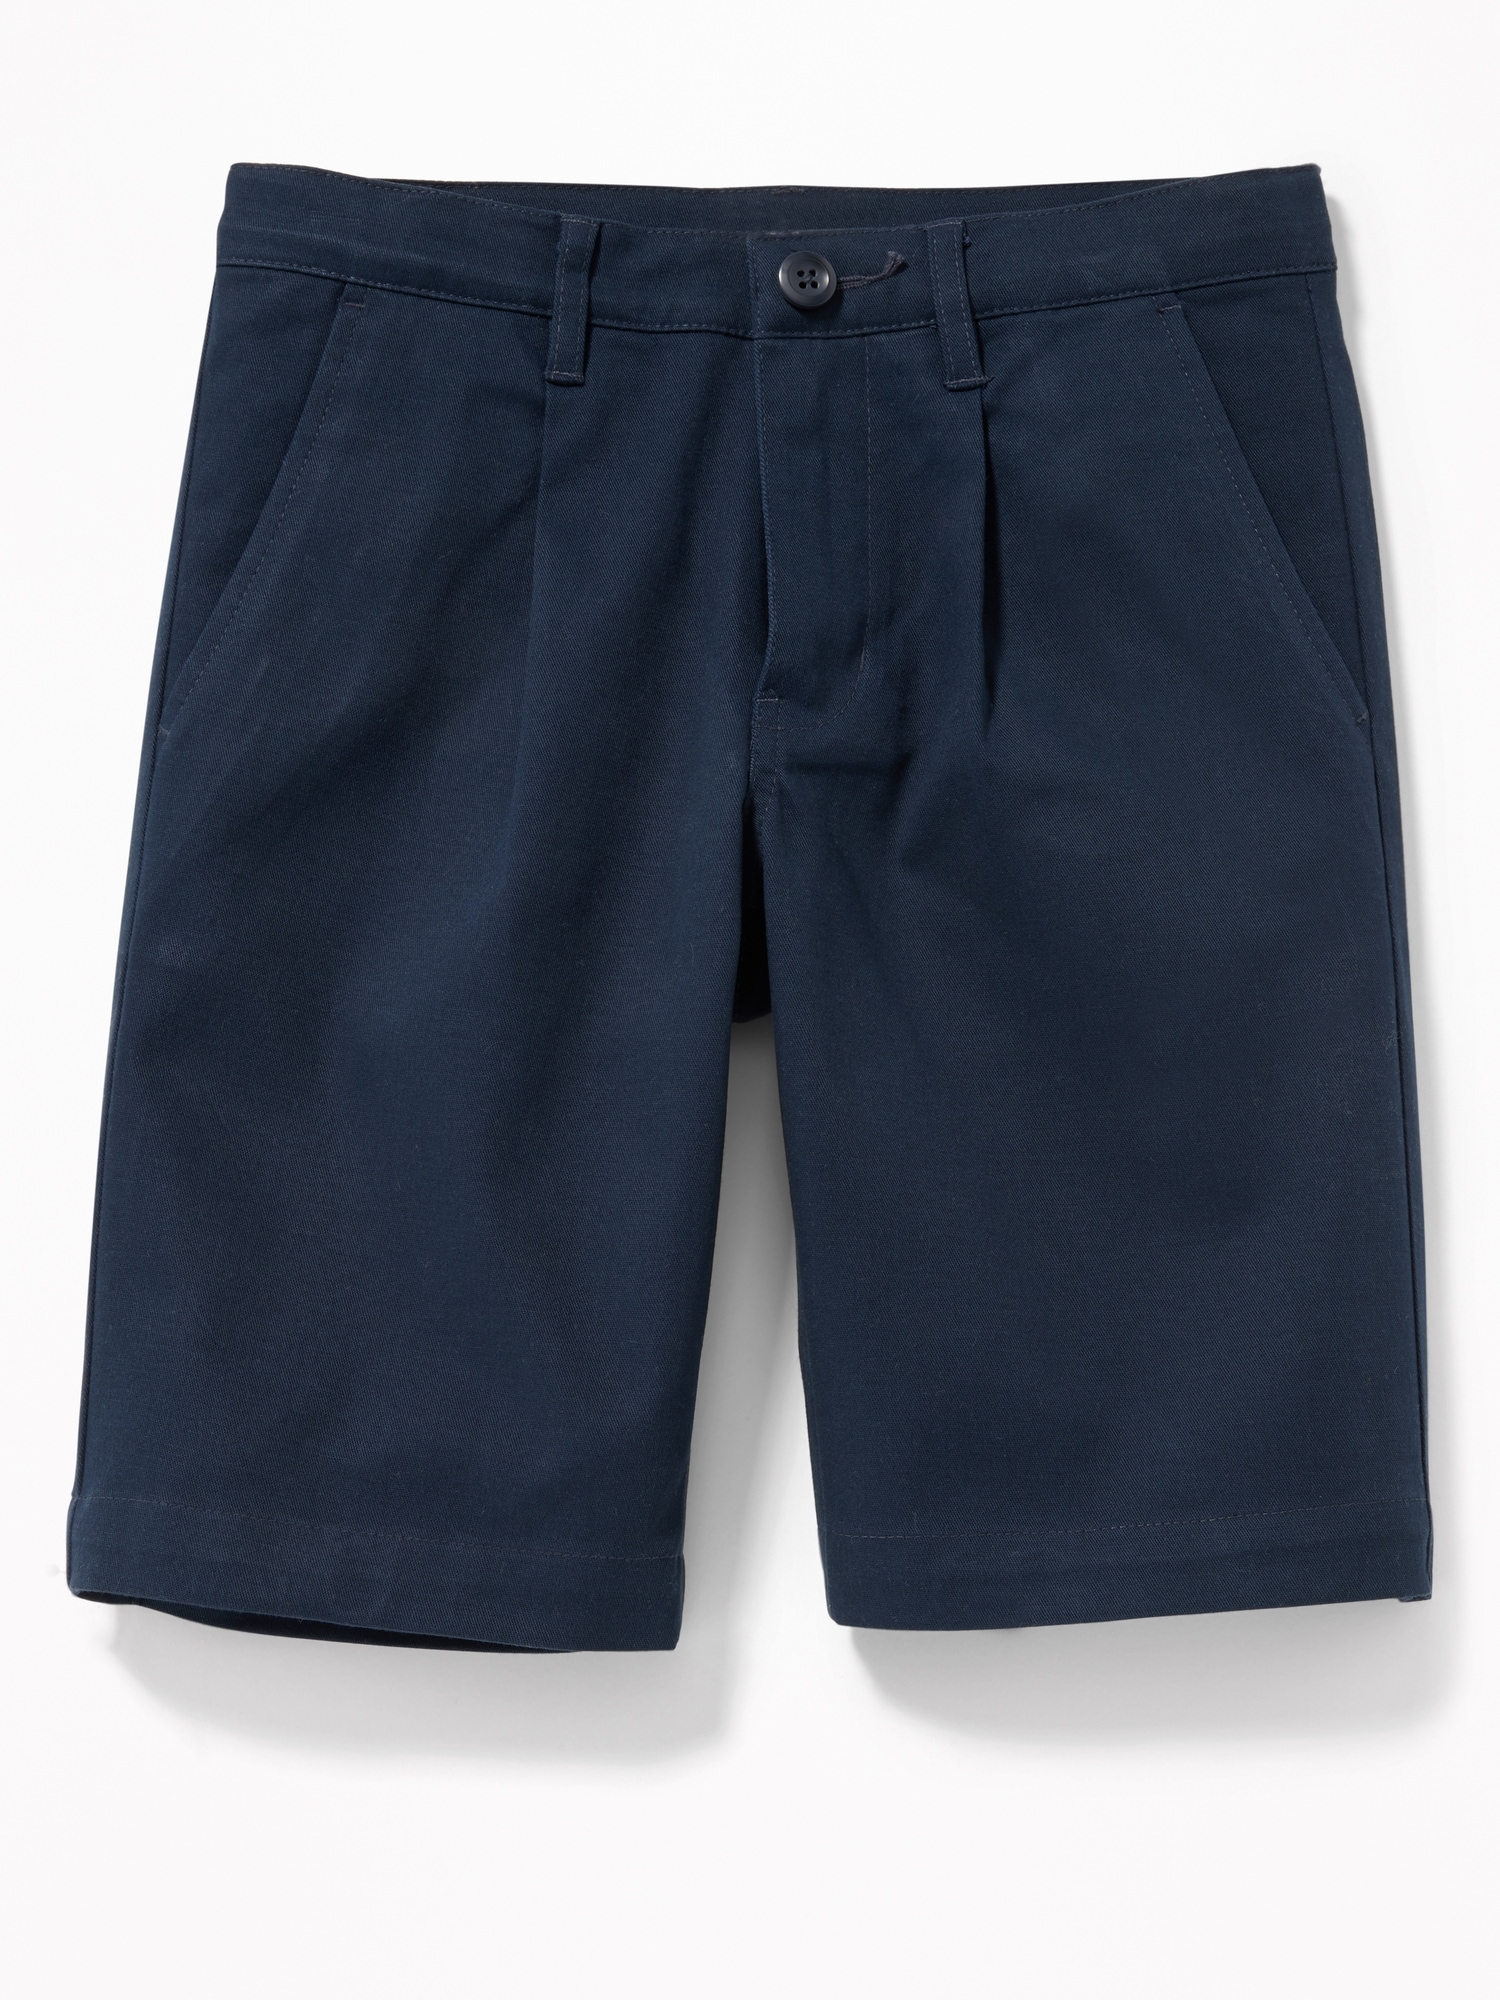 *Today Only Deal* Pleated Built-In Flex Straight Uniform Shorts for Boys